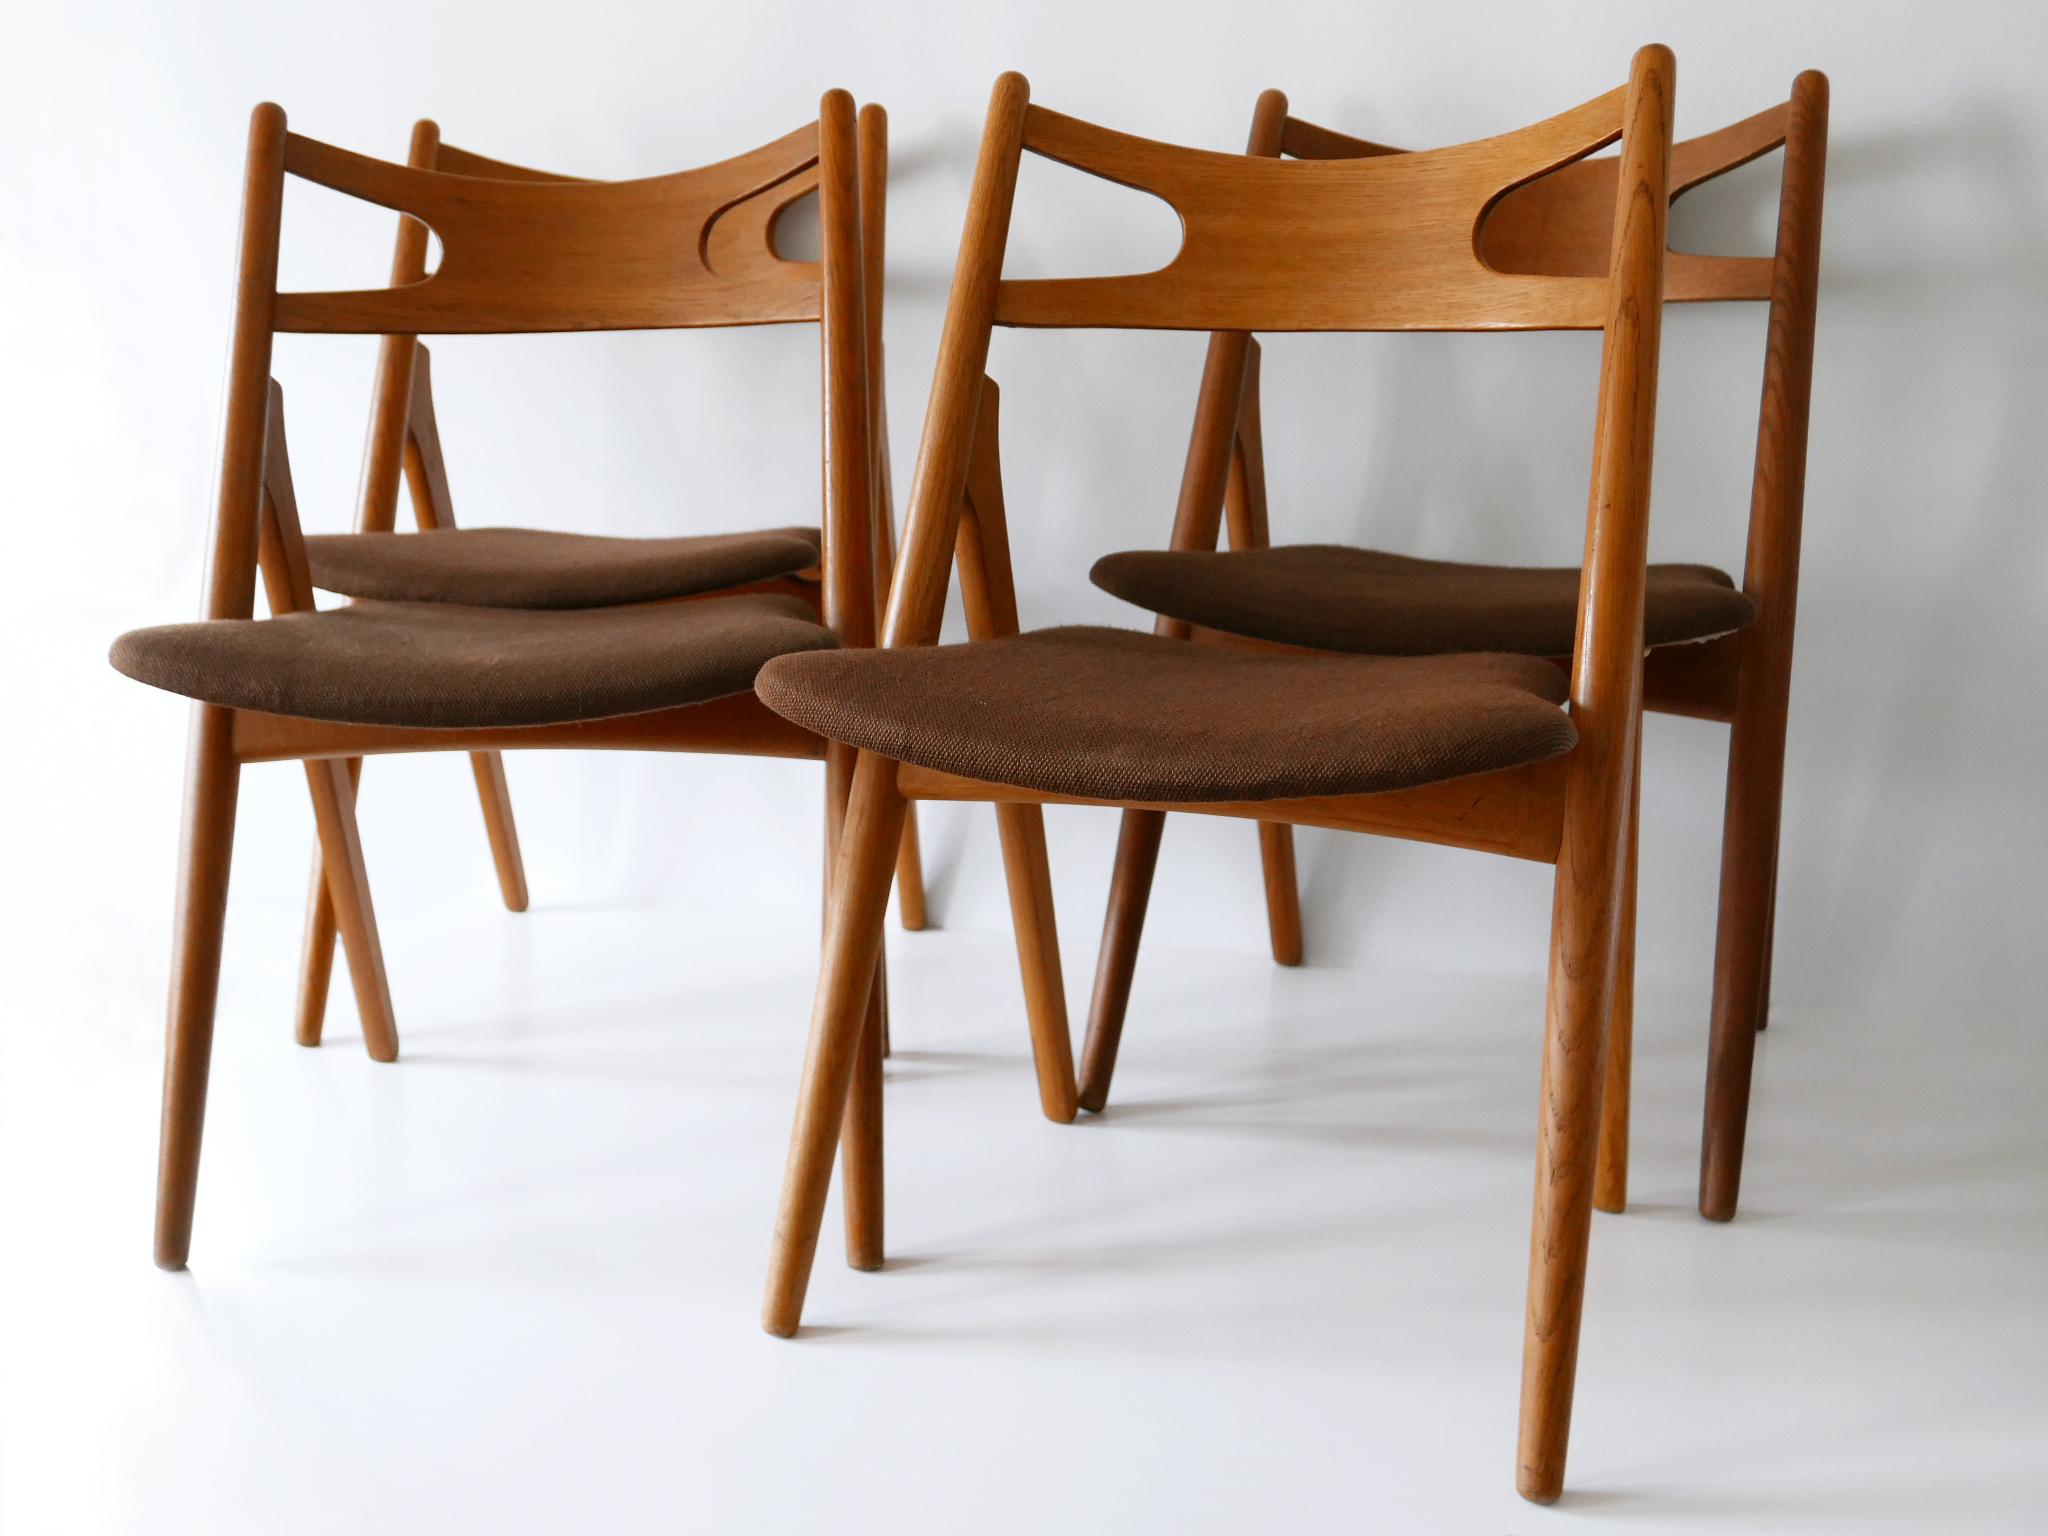 Original, elegant and minimalistic set of four danish modern CH-29 Sawbuck dining chairs. Designed by Hans J. Wagner in 1951 for Carl Hansen & Søn, Denmark. Manufactured probably in 1960s. Manufacturer's label to underside of the seats. 

PS: 1 x